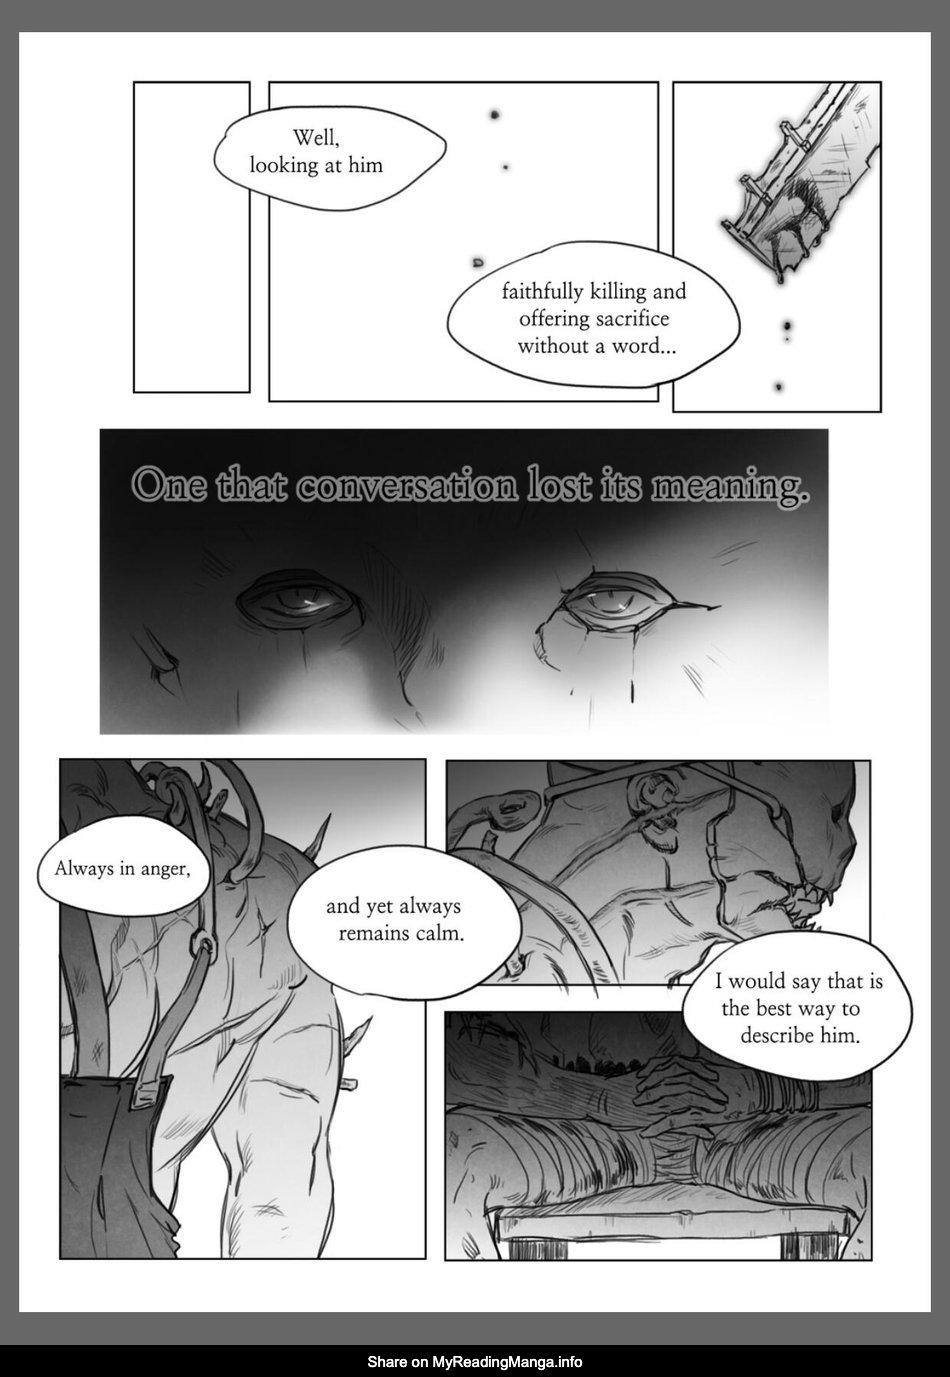 Nasty Bring Me to Death - Dead by daylight Amature Allure - Page 3